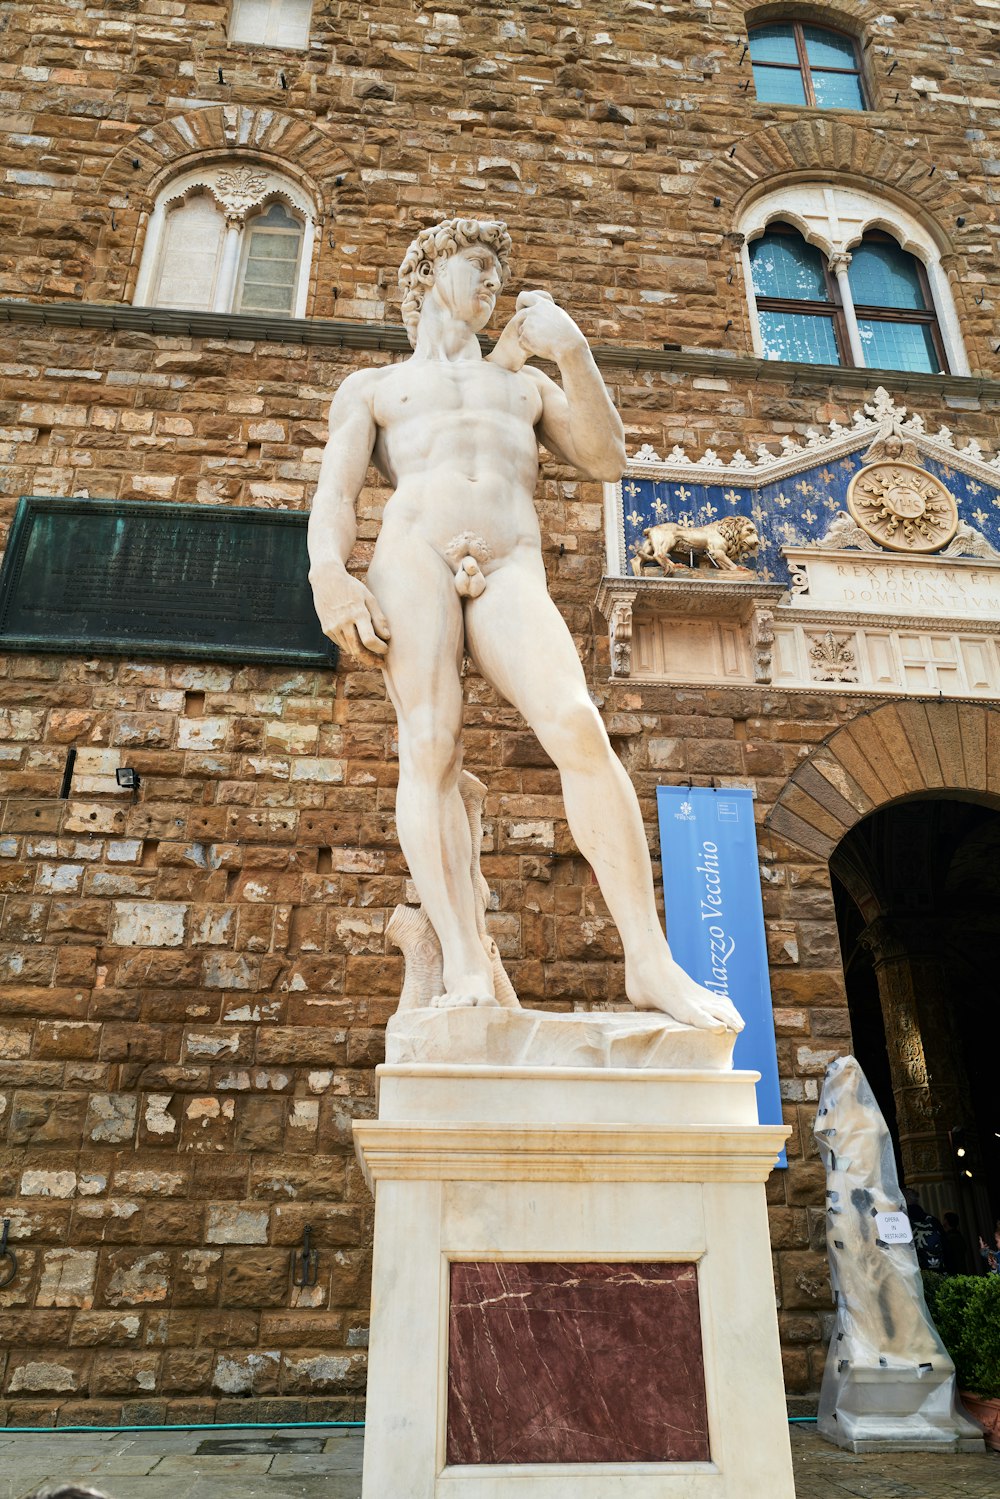 a statue of a man standing in front of a brick building